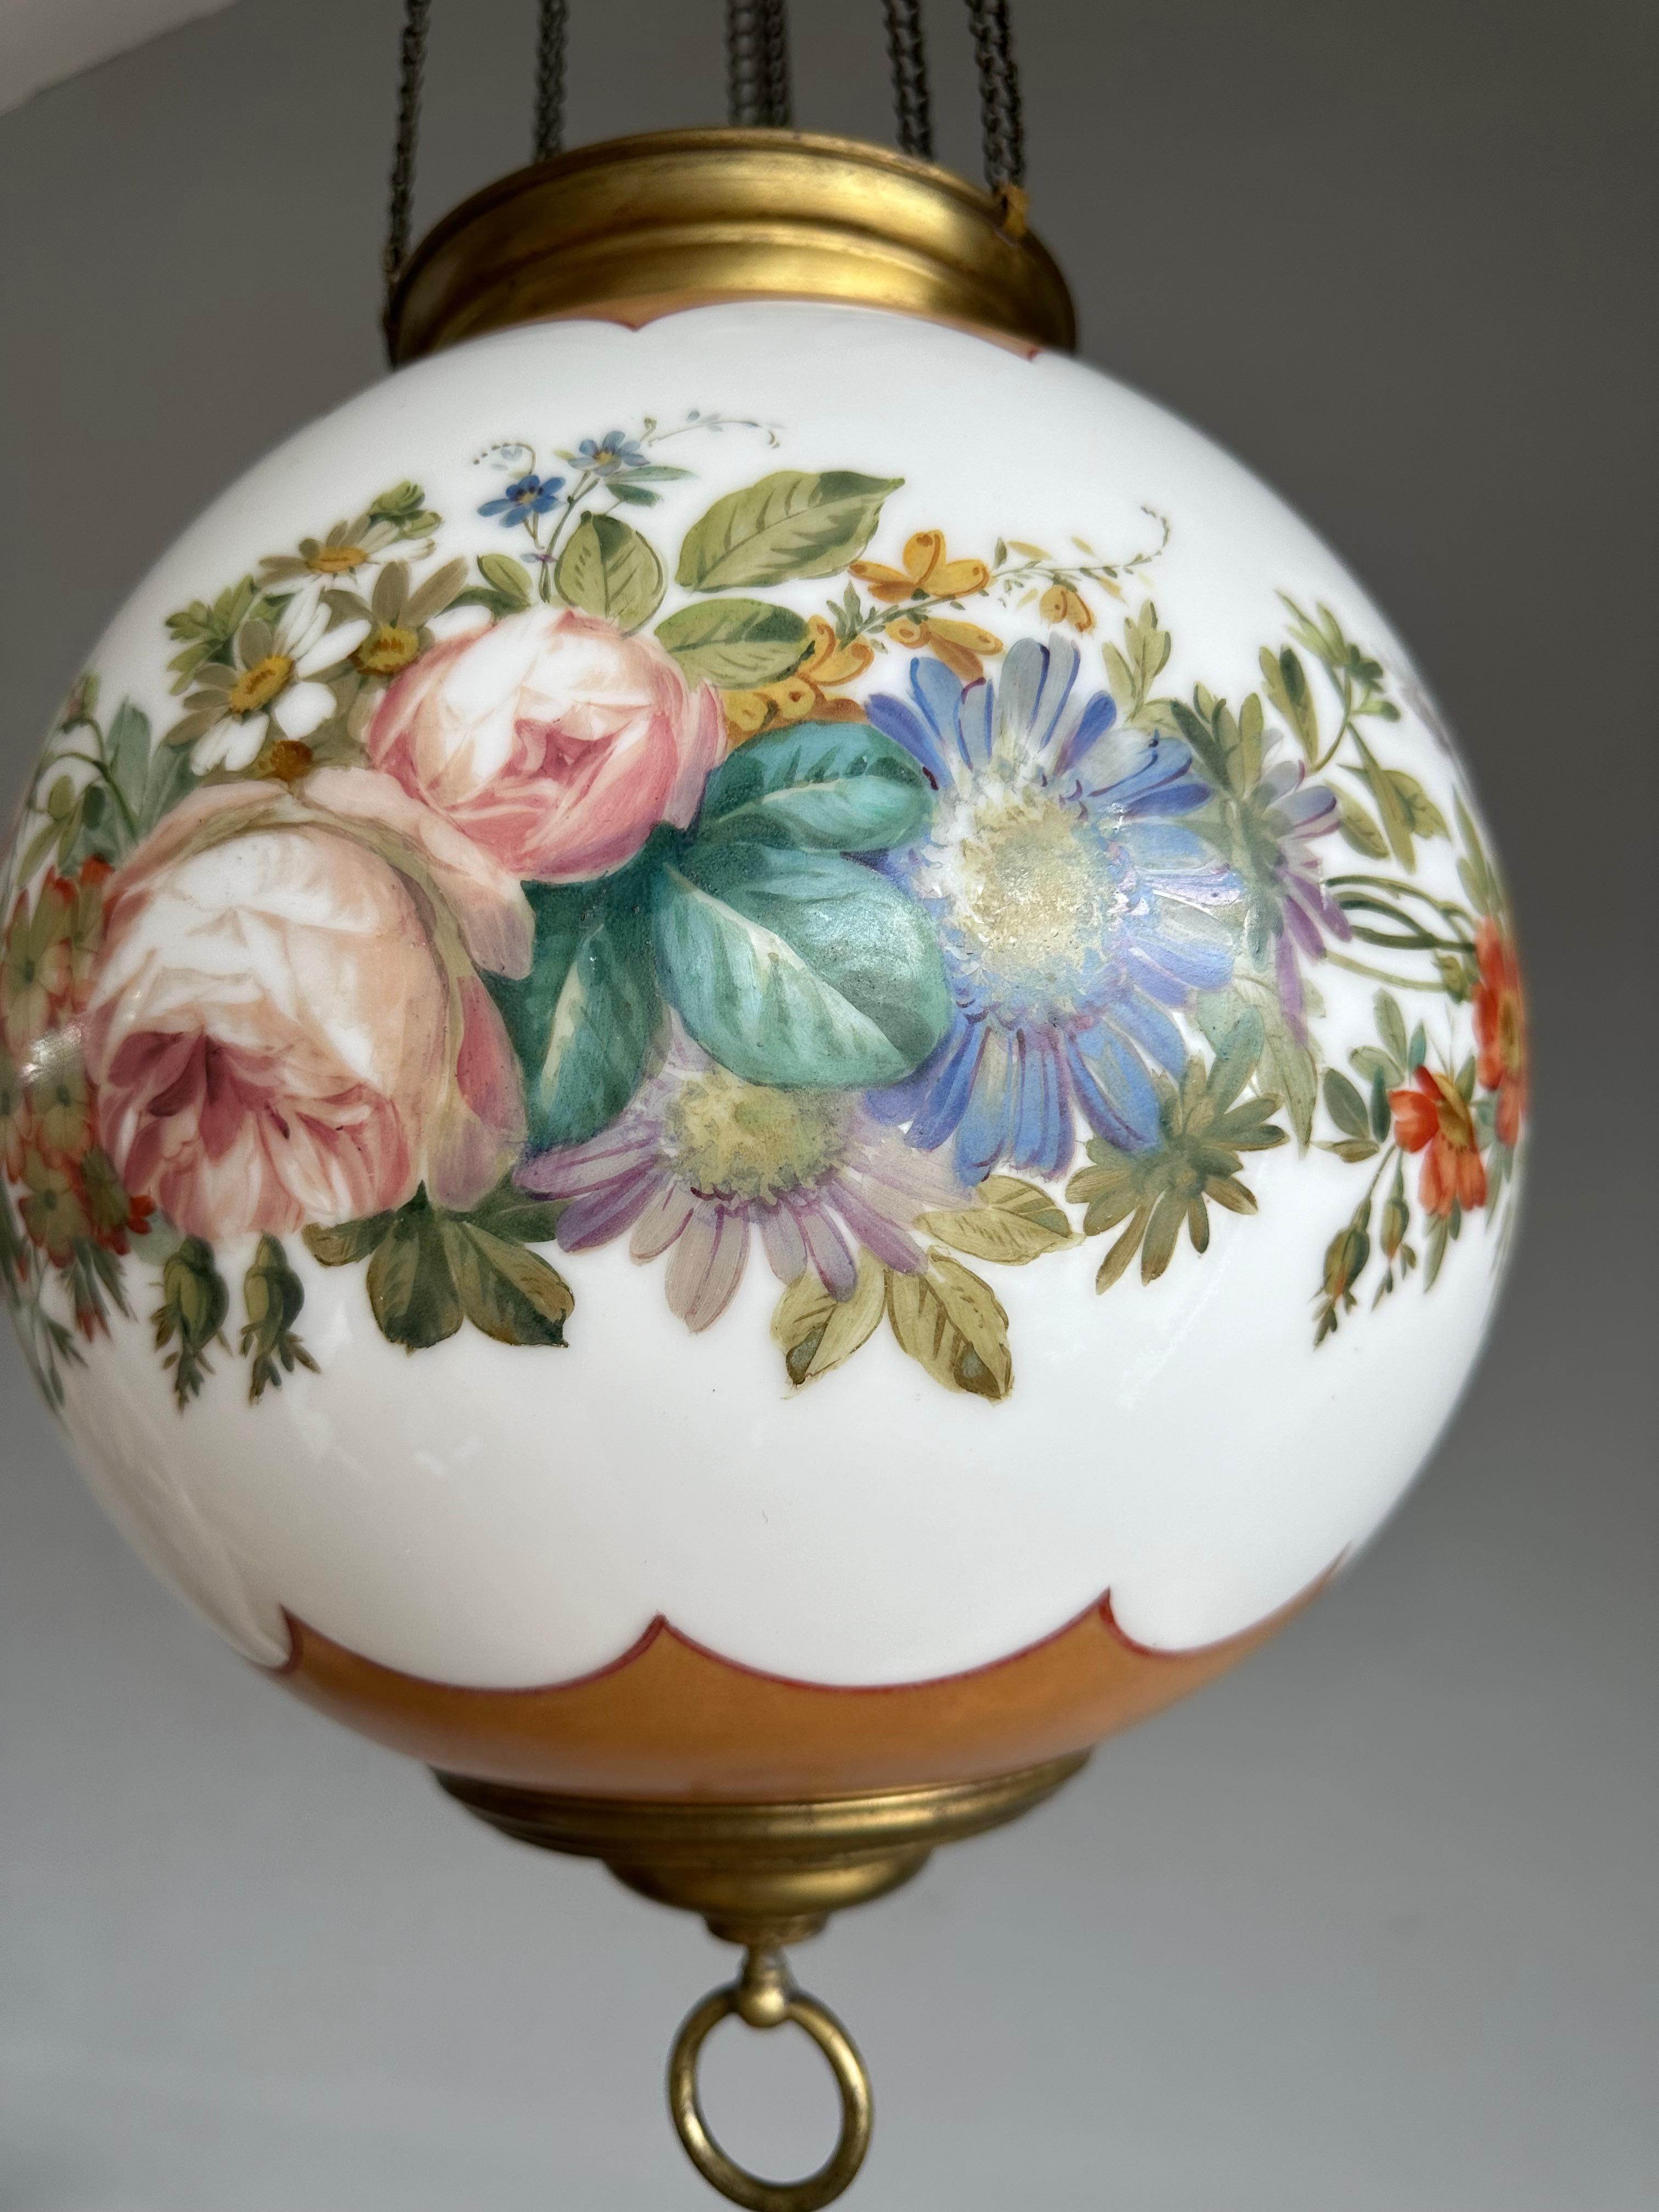 Antique Round Opaline Glass Shade Pendant Light with Wreath of Flowers Decor In Good Condition For Sale In Lisse, NL